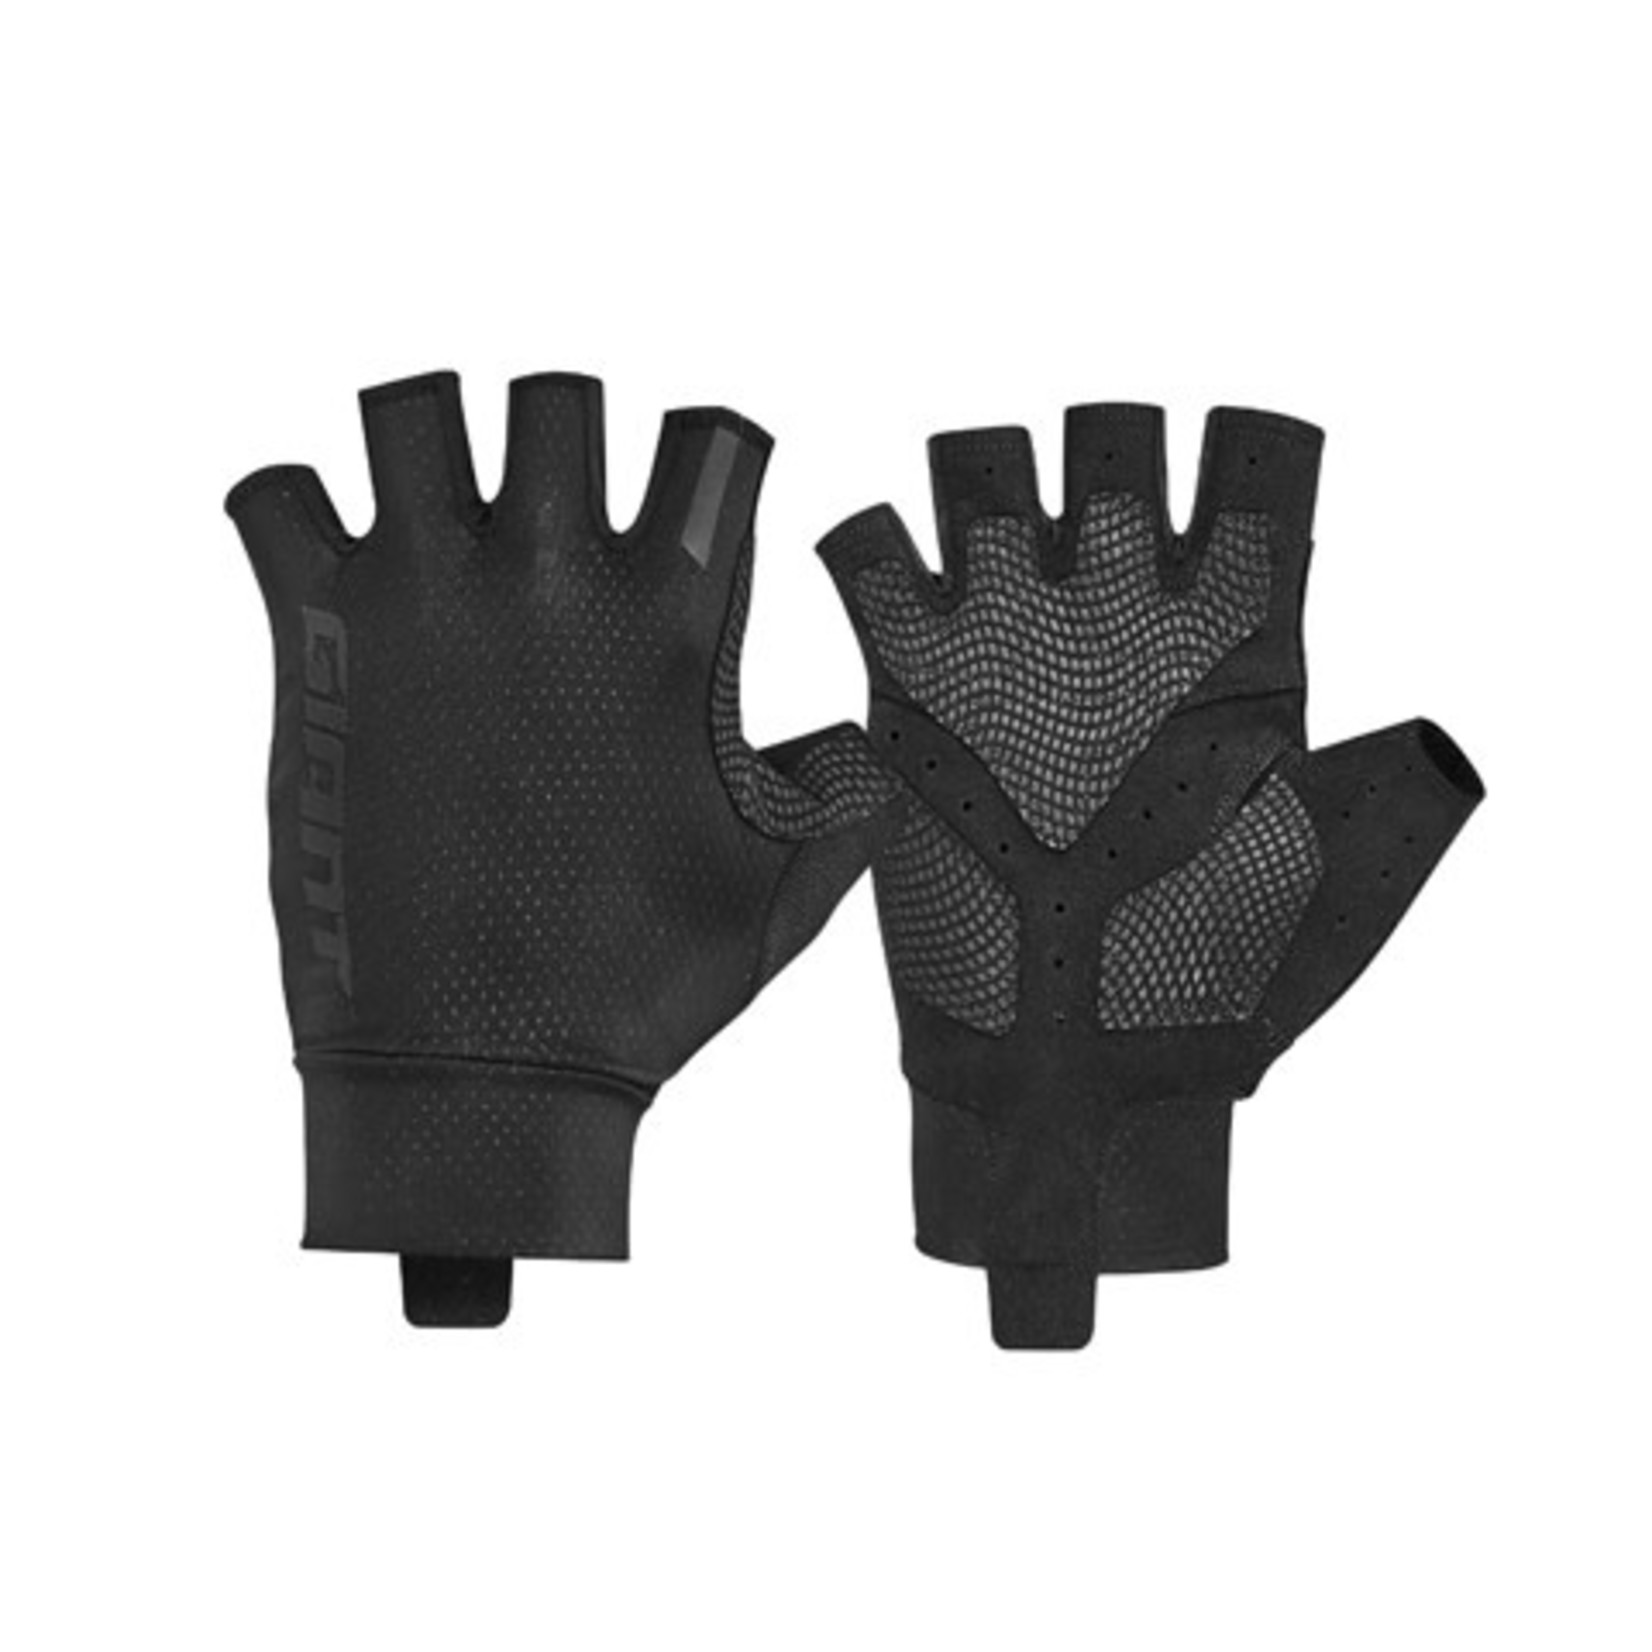 Giant Elevate SF Cycling Glove